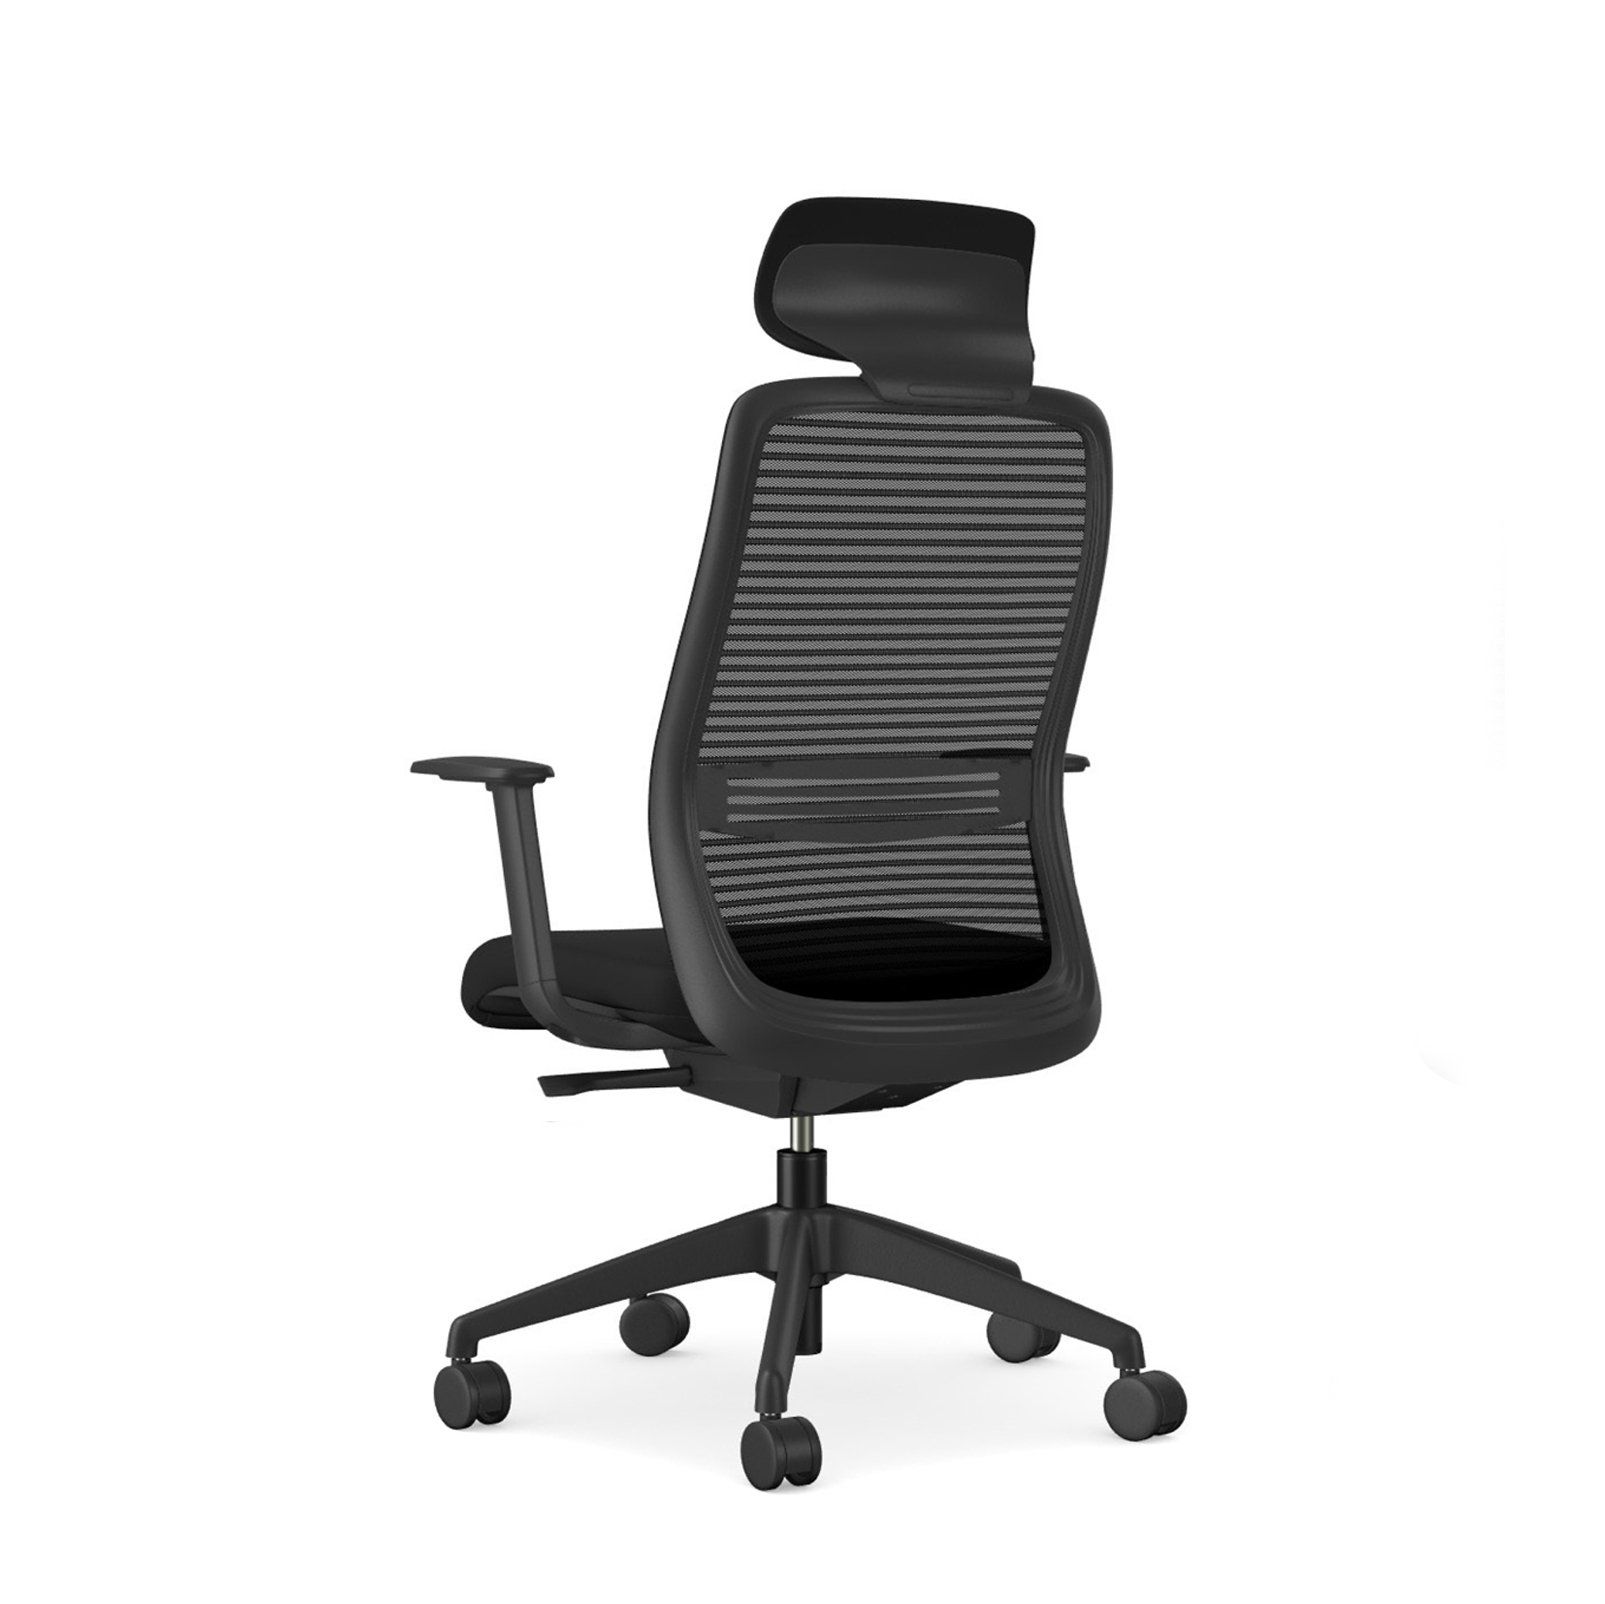 M-Form mesh office chair